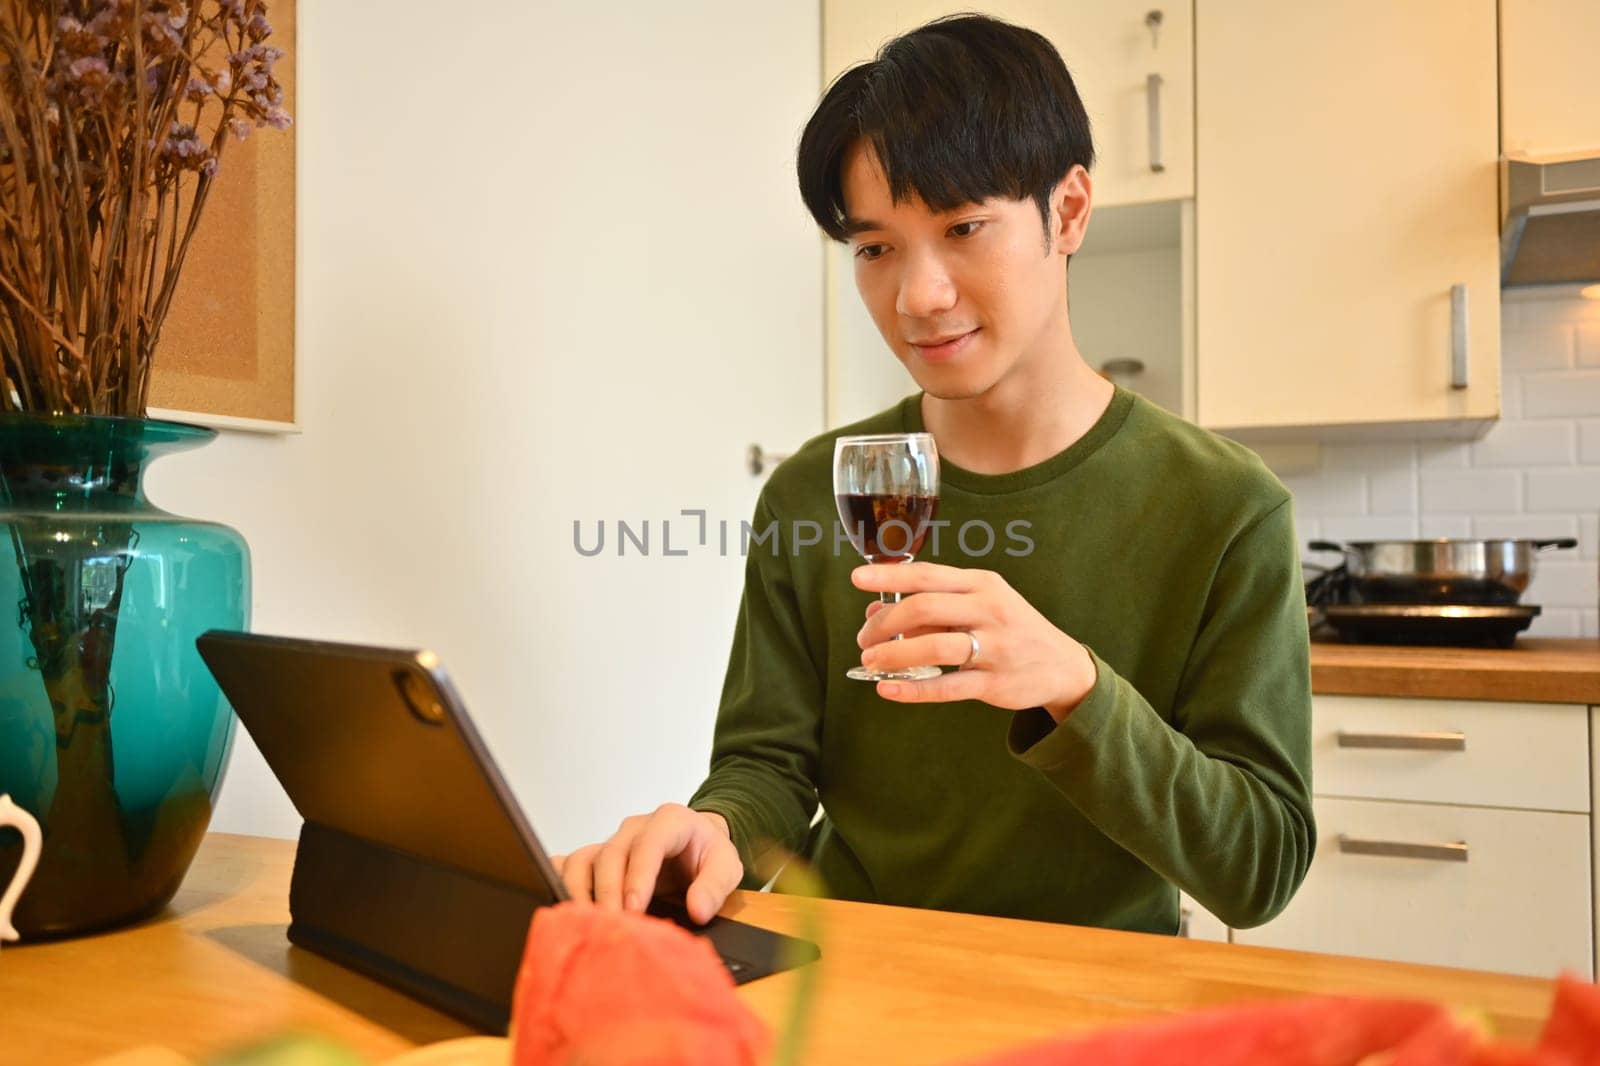 Smiling asian man in casual clothes holding glass of wine and using digital tablet on kitchen worktop.